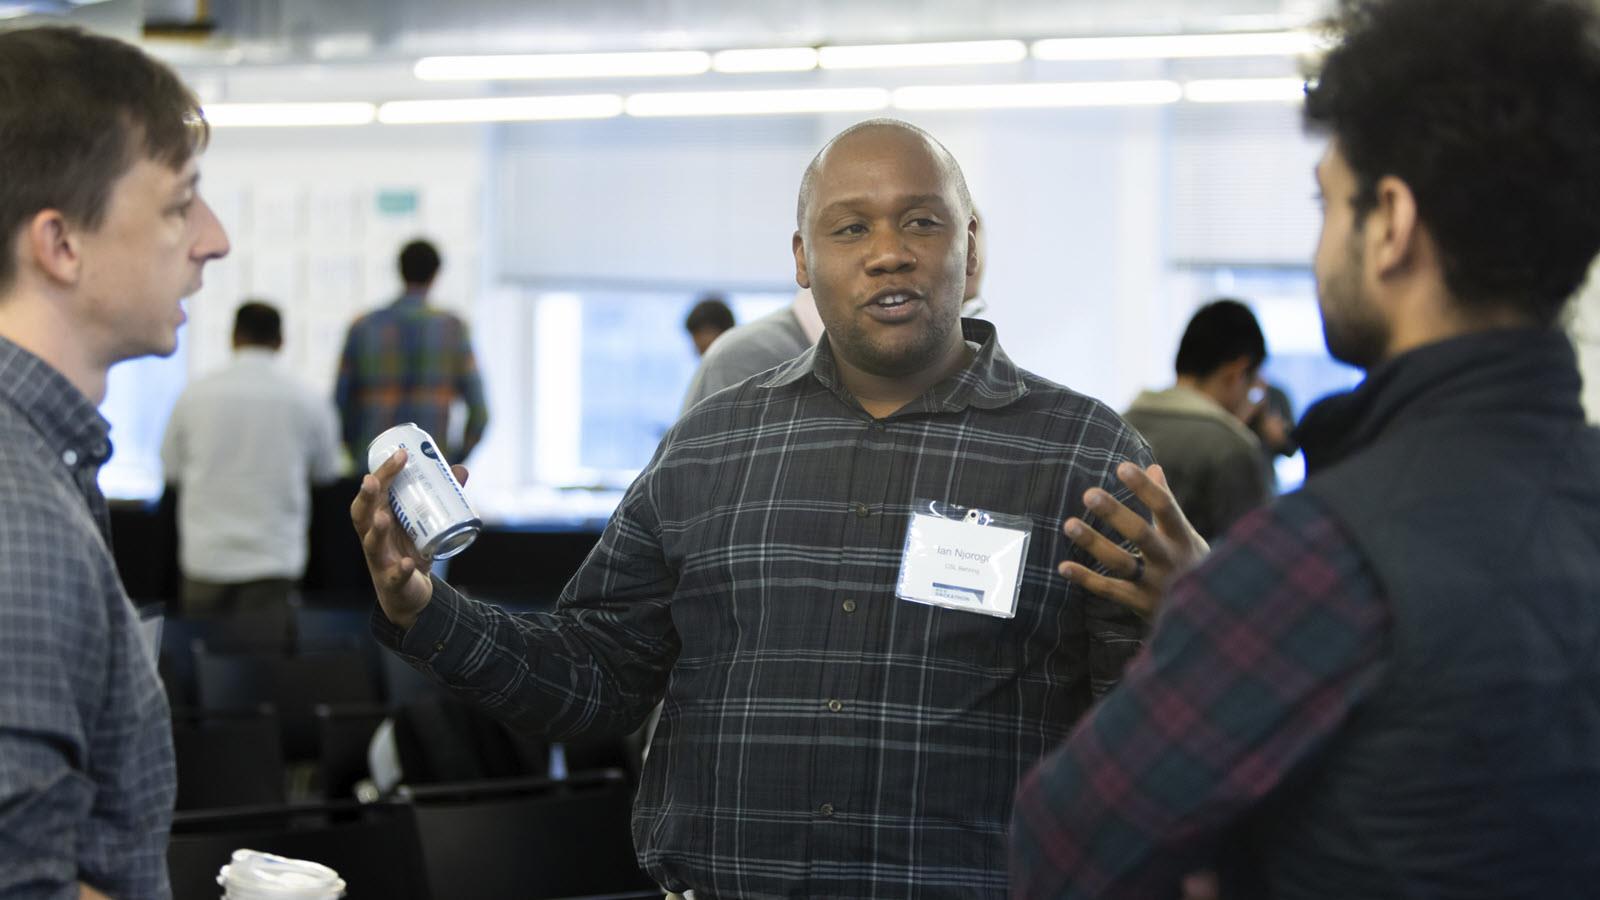 Ian Njoroge in conversation at a quantum computing event in Chicago